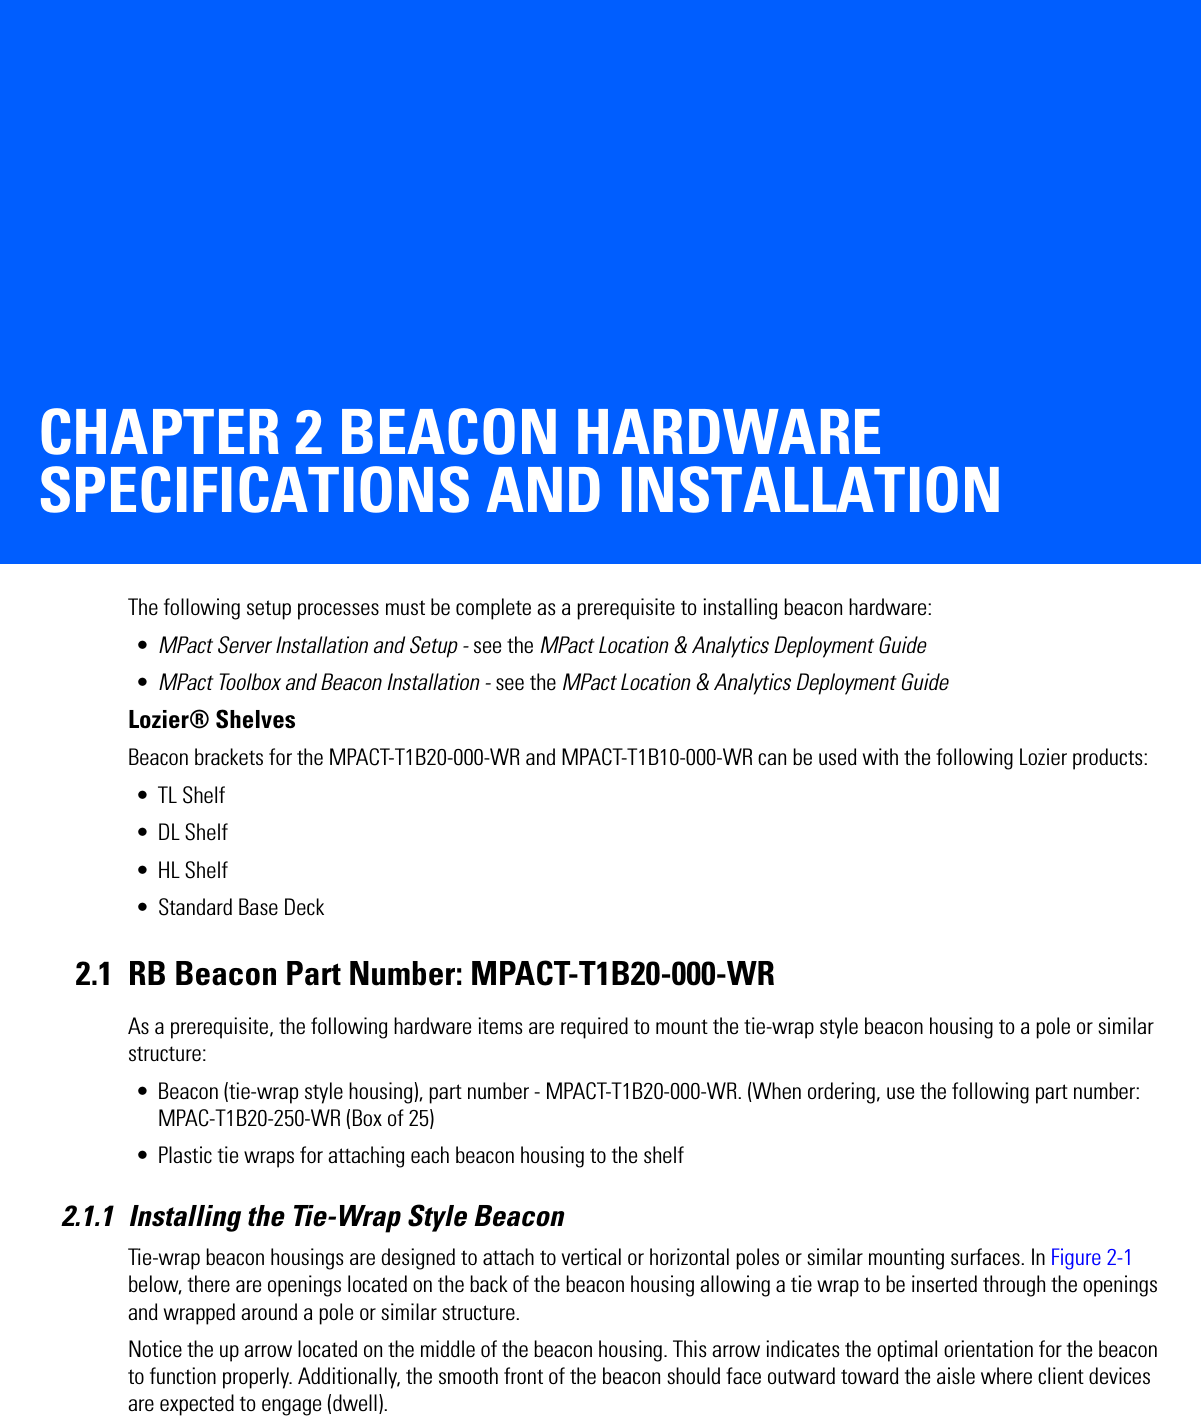 CHAPTER 2 BEACON HARDWARE SPECIFICATIONS AND INSTALLATIONThe following setup processes must be complete as a prerequisite to installing beacon hardware:•MPact Server Installation and Setup - see the MPact Location &amp; Analytics Deployment Guide•MPact Toolbox and Beacon Installation - see the MPact Location &amp; Analytics Deployment GuideLozier® ShelvesBeacon brackets for the MPACT-T1B20-000-WR and MPACT-T1B10-000-WR can be used with the following Lozier products:• TL Shelf•DL Shelf•HL Shelf• Standard Base Deck2.1 RB Beacon Part Number: MPACT-T1B20-000-WRAs a prerequisite, the following hardware items are required to mount the tie-wrap style beacon housing to a pole or similar structure:• Beacon (tie-wrap style housing), part number - MPACT-T1B20-000-WR. (When ordering, use the following part number: MPAC-T1B20-250-WR (Box of 25)• Plastic tie wraps for attaching each beacon housing to the shelf2.1.1 Installing the Tie-Wrap Style BeaconTie-wrap beacon housings are designed to attach to vertical or horizontal poles or similar mounting surfaces. In Figure 2-1 below, there are openings located on the back of the beacon housing allowing a tie wrap to be inserted through the openings and wrapped around a pole or similar structure. Notice the up arrow located on the middle of the beacon housing. This arrow indicates the optimal orientation for the beacon to function properly. Additionally, the smooth front of the beacon should face outward toward the aisle where client devices are expected to engage (dwell). 